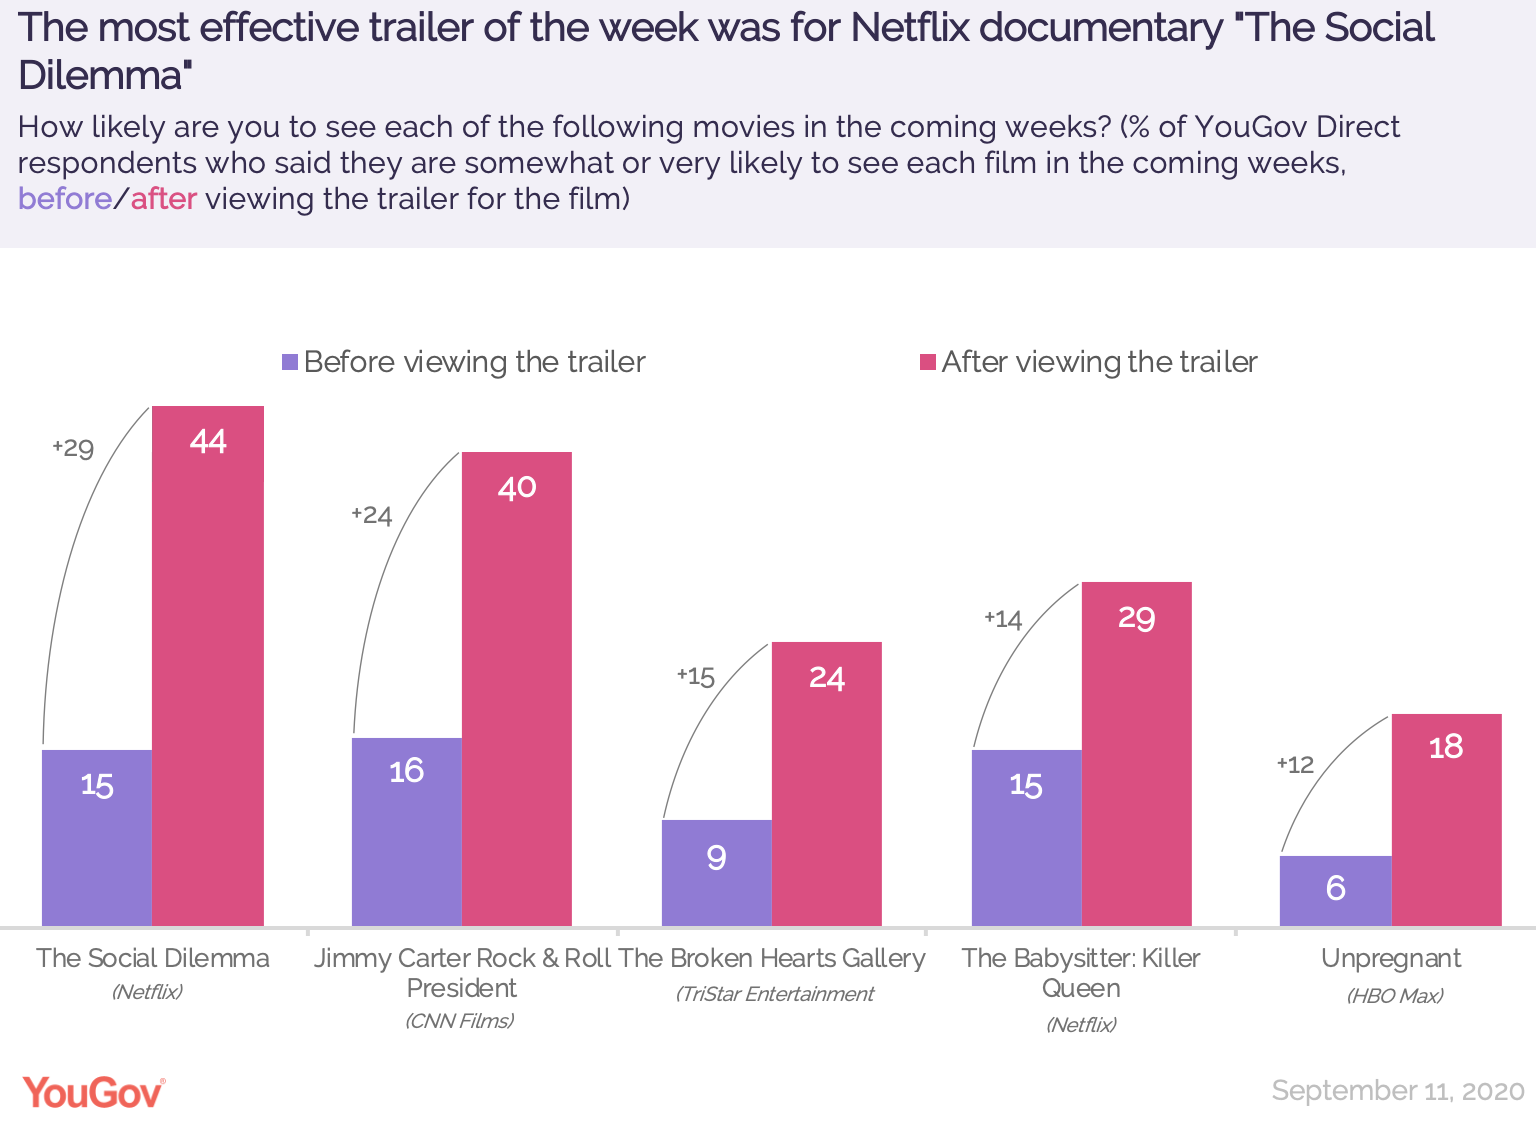 The Trailer For Big Tech Documentary The Social Dilemma Hooked Viewers This Week Yougov